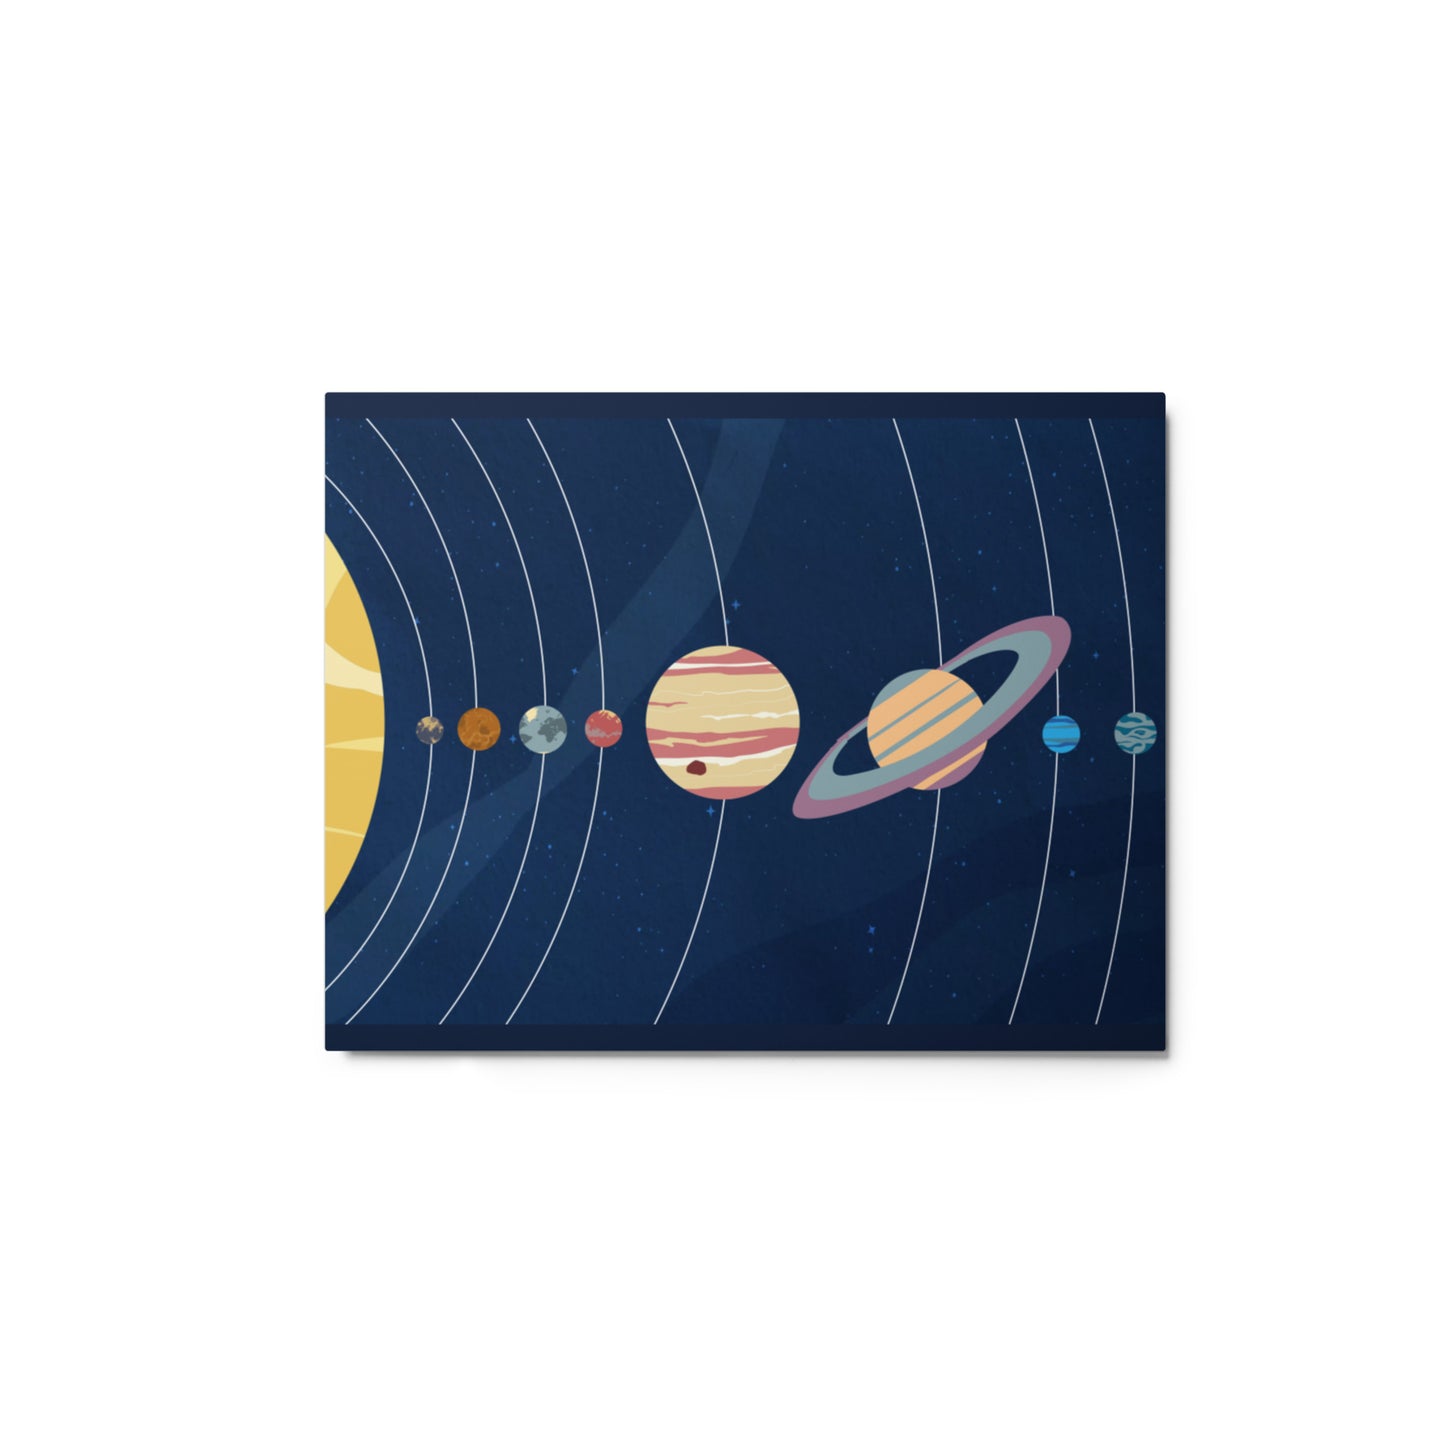 Metal prints of the Solar System